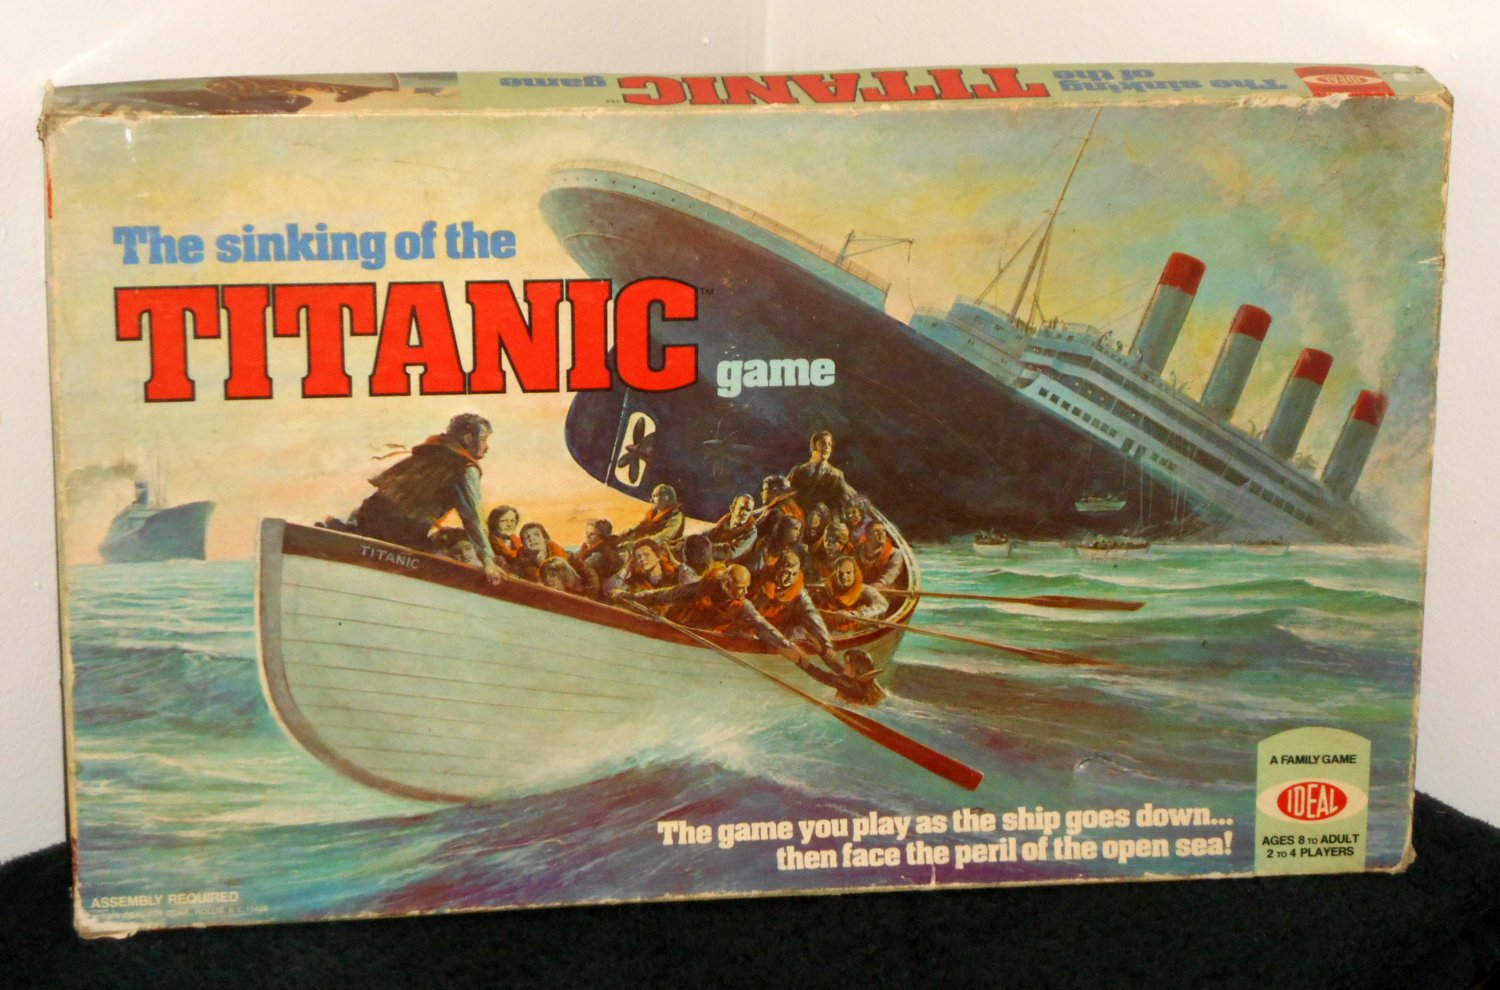 SOLD Vintage 1976 Sinking of the Titanic Board Game Ideal Toy Corp 2003-21500 x 990